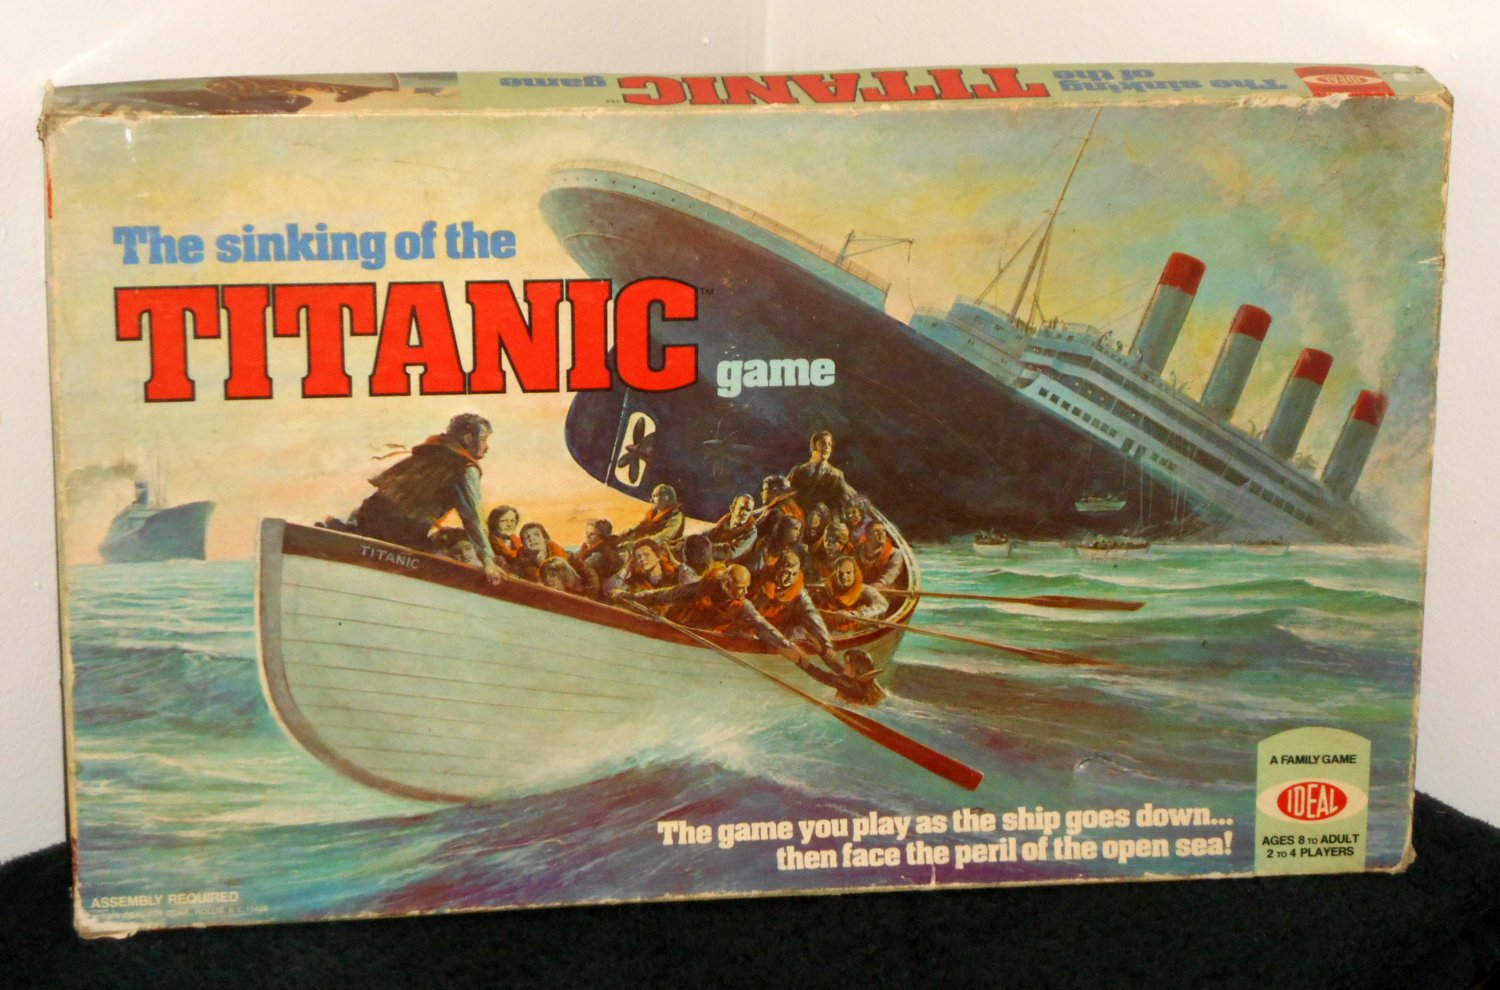 SOLD Vintage 1976 Sinking of the Titanic Board Game Ideal Toy Corp 2003-21500 x 990